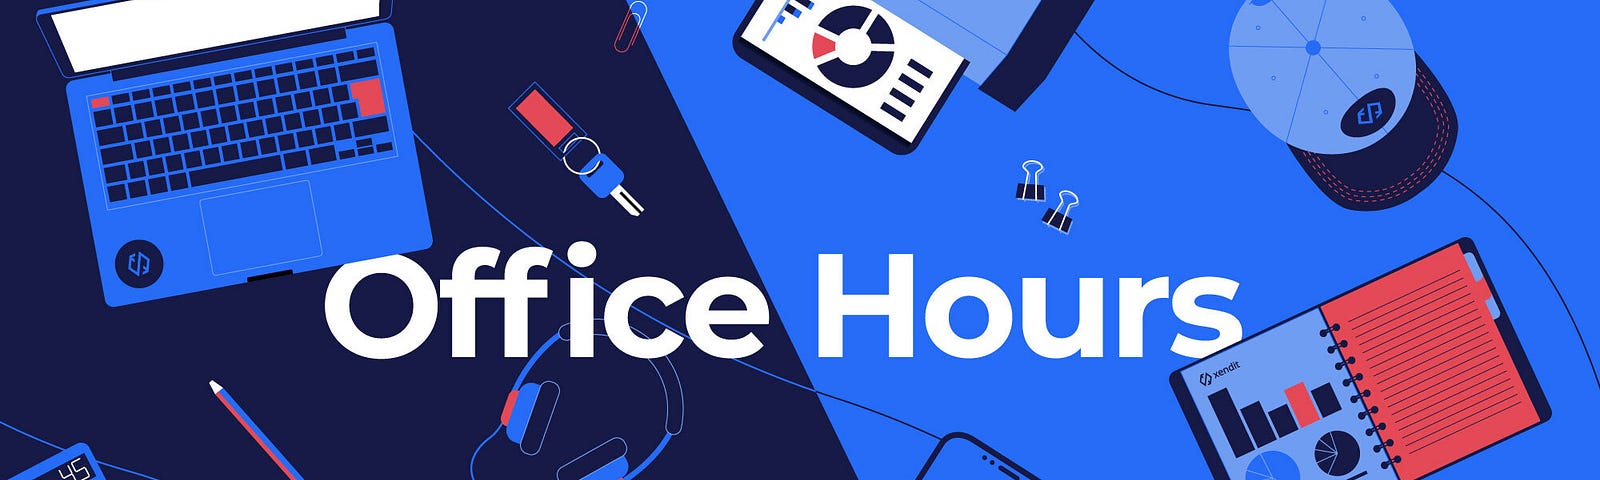 Office Hour Banner